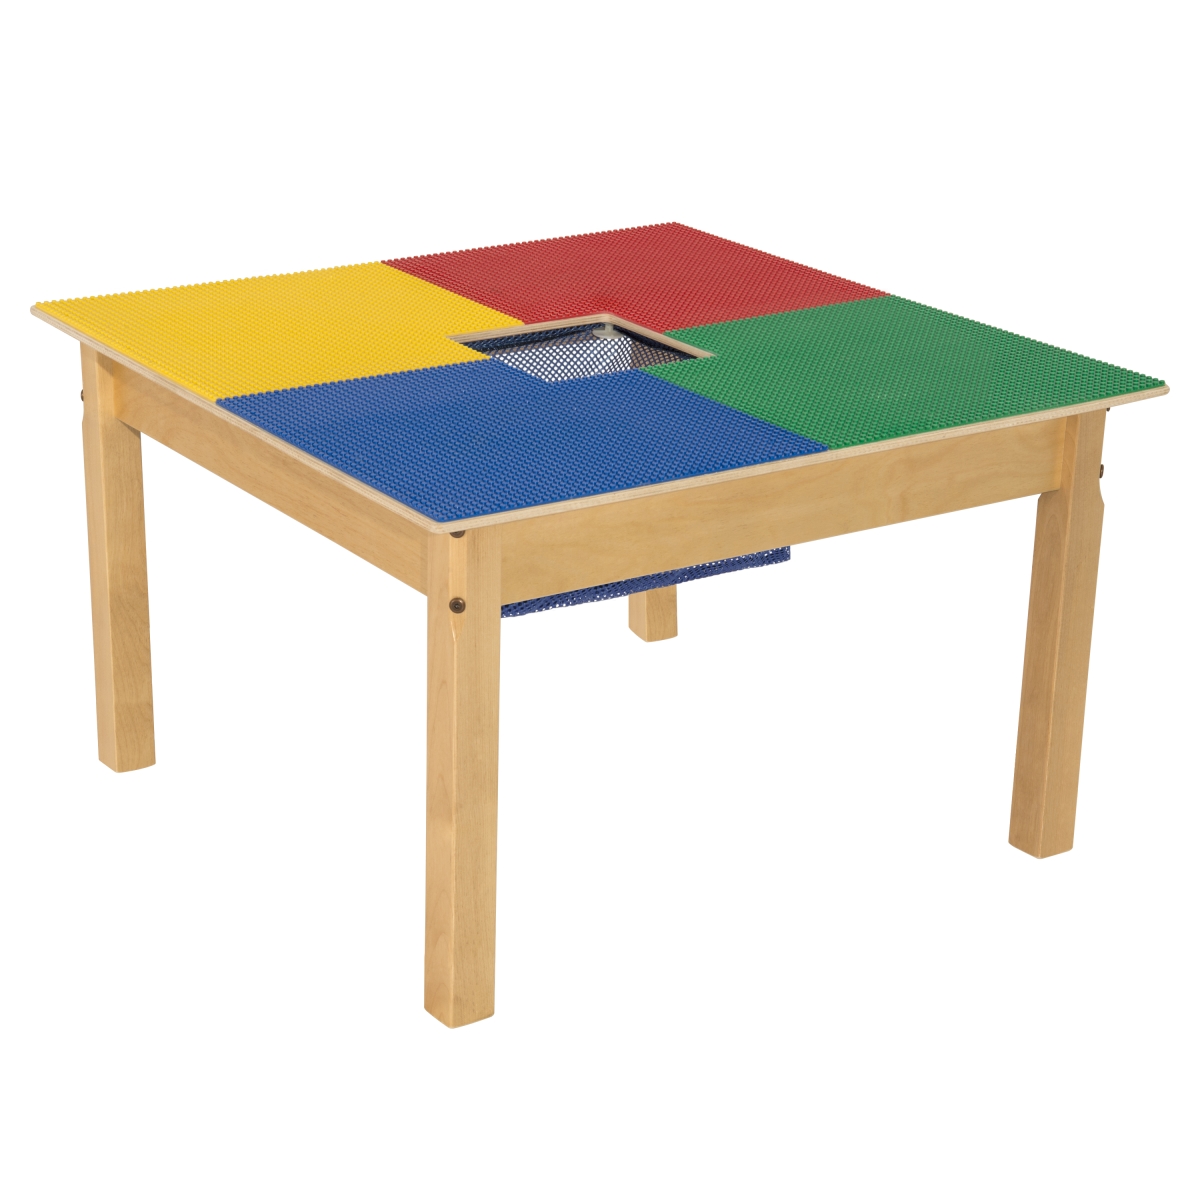 Tp3131sgn18 18 In. Lego Compatible Square Table With Legs, Multi Color